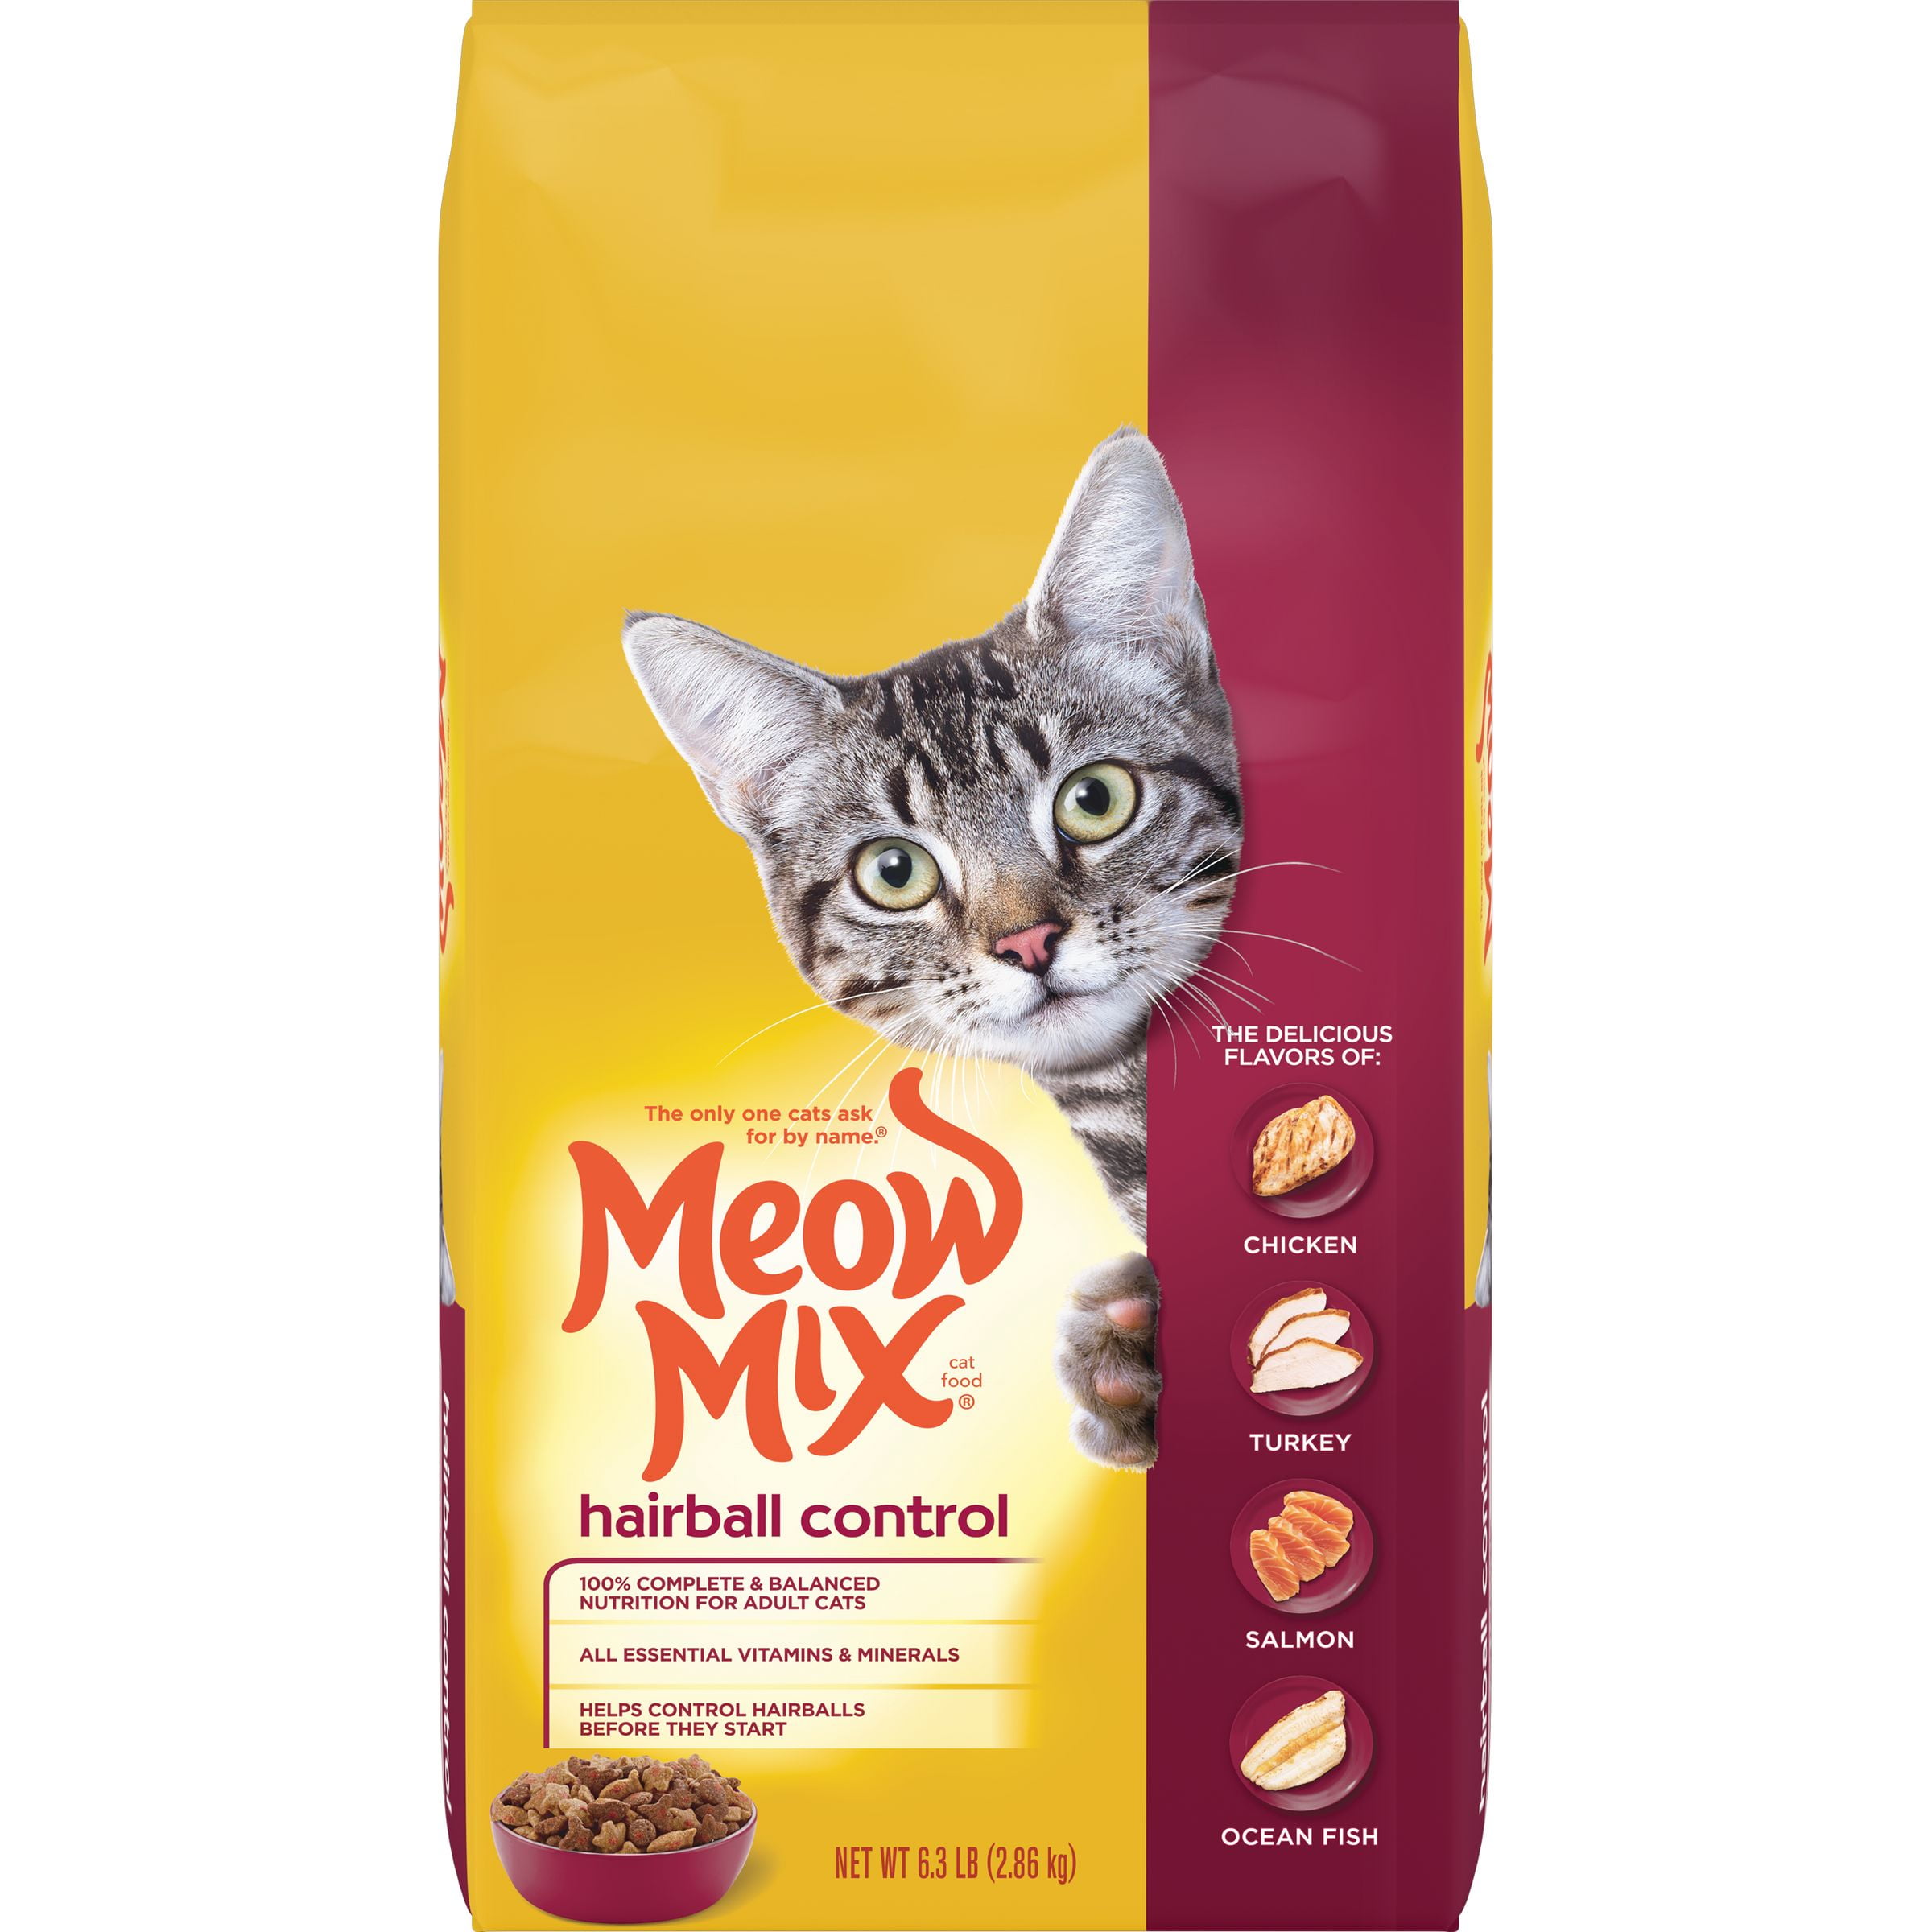 Meow Mix Hairball Control Cat Food, 6.3-Pound